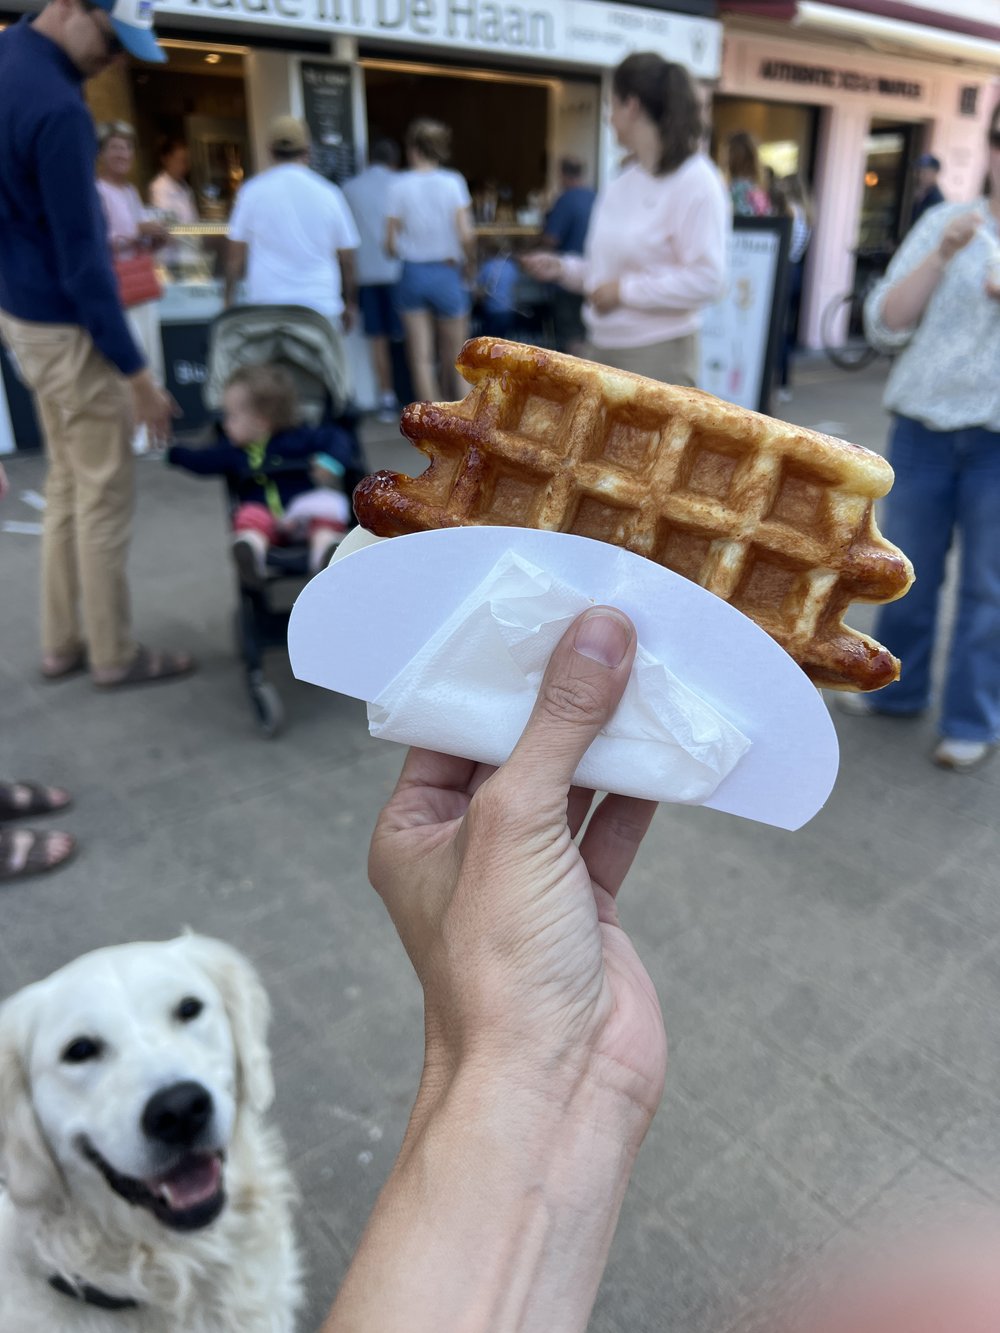 Liege Waffle at the Seaside